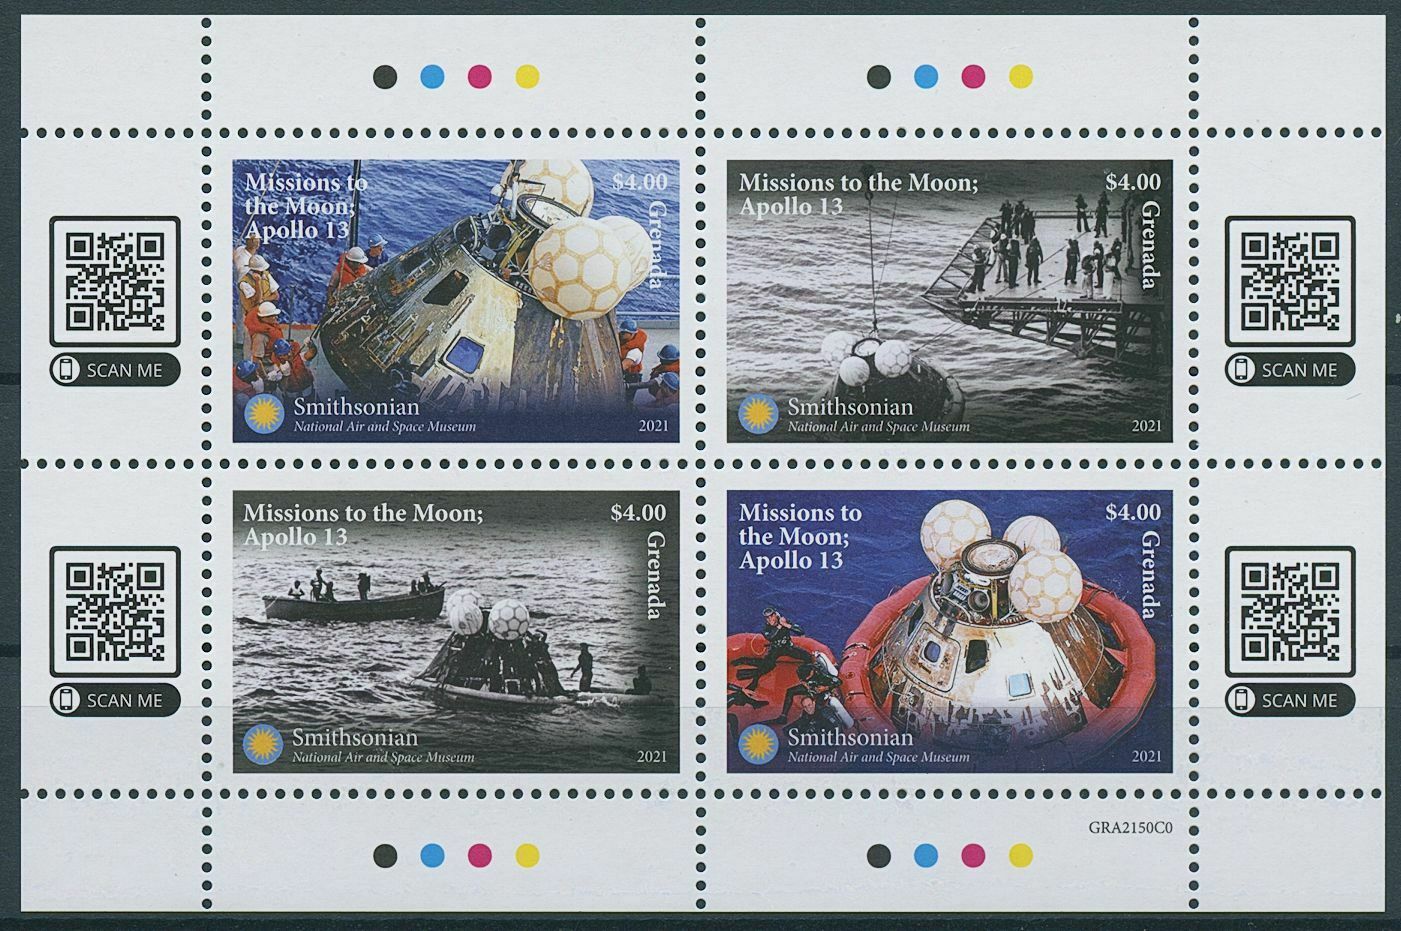 Grenada 2021 MNH Space Stamps Smithsonian Apollo 13 Missions to Moon 4v M/S II